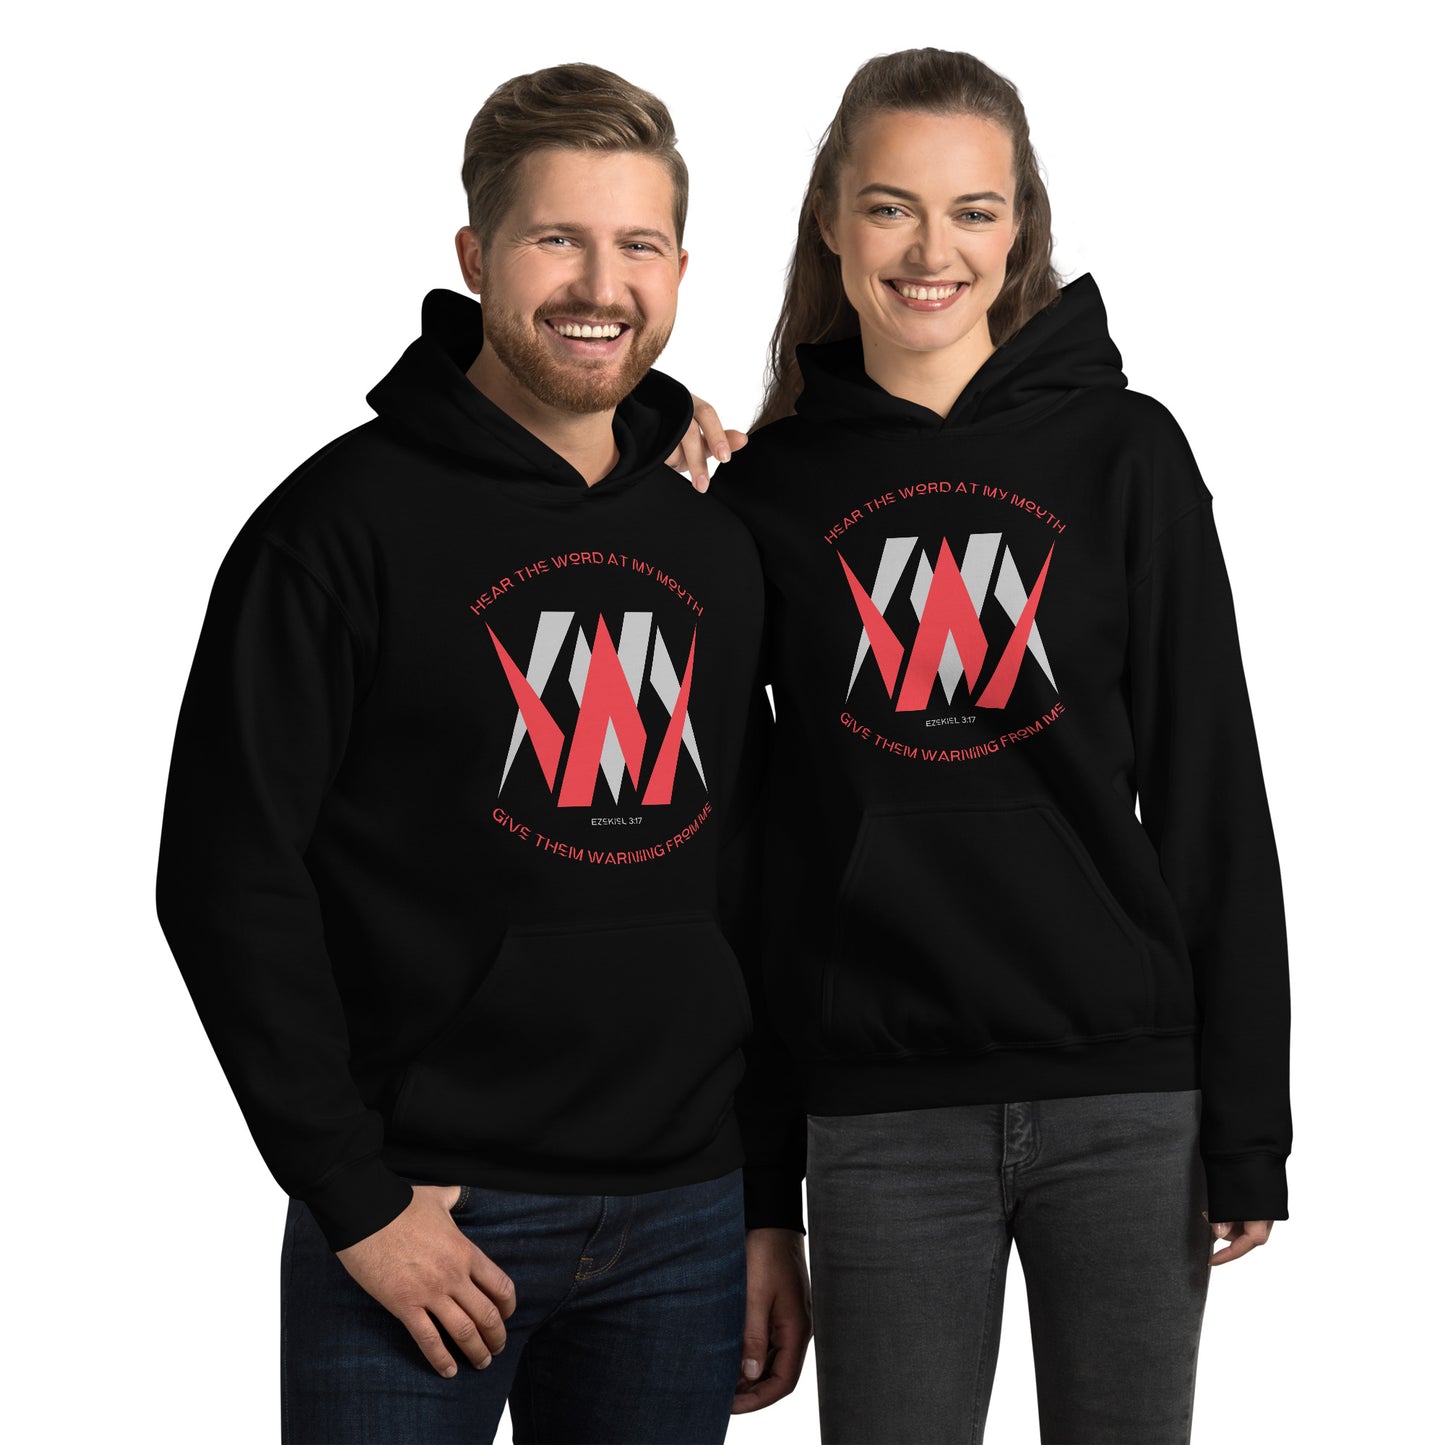 WM Hear The Word At My Mouth Give Them Warning From Me Unisex Hoodie